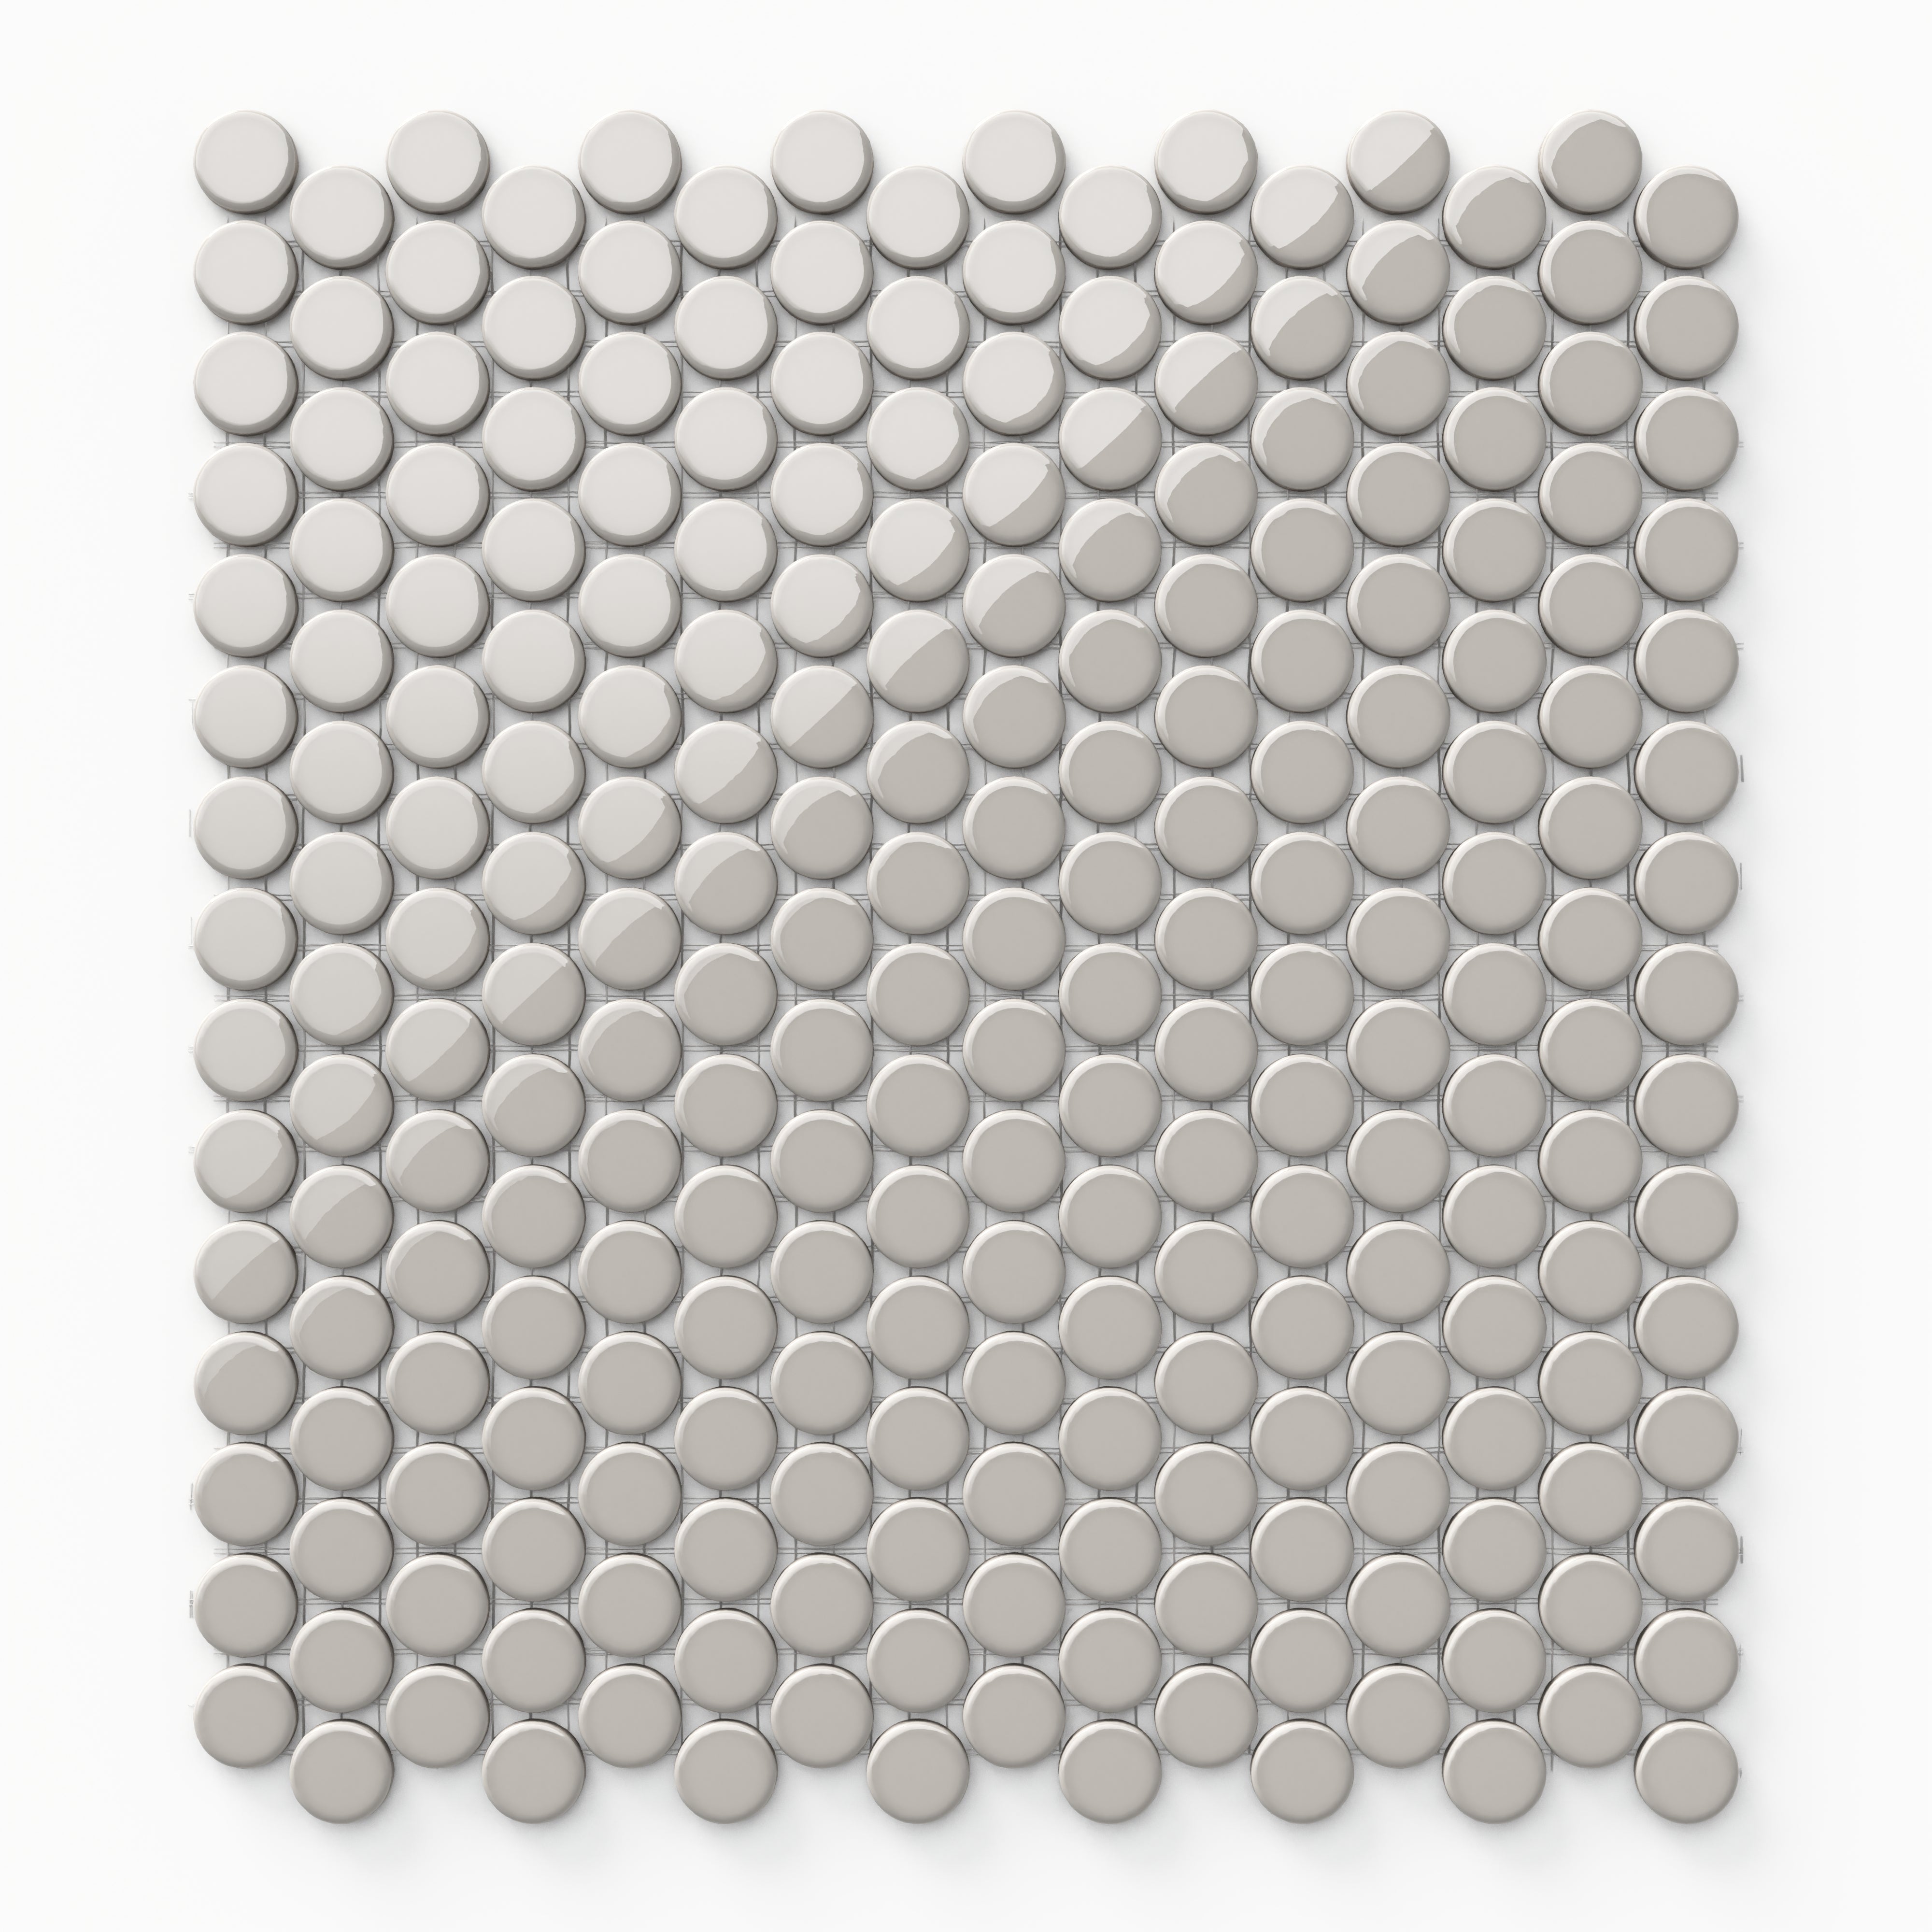 Ollie 3/4x3/4 Glossy Porcelain Mosaic Penny Round Tile in Grey